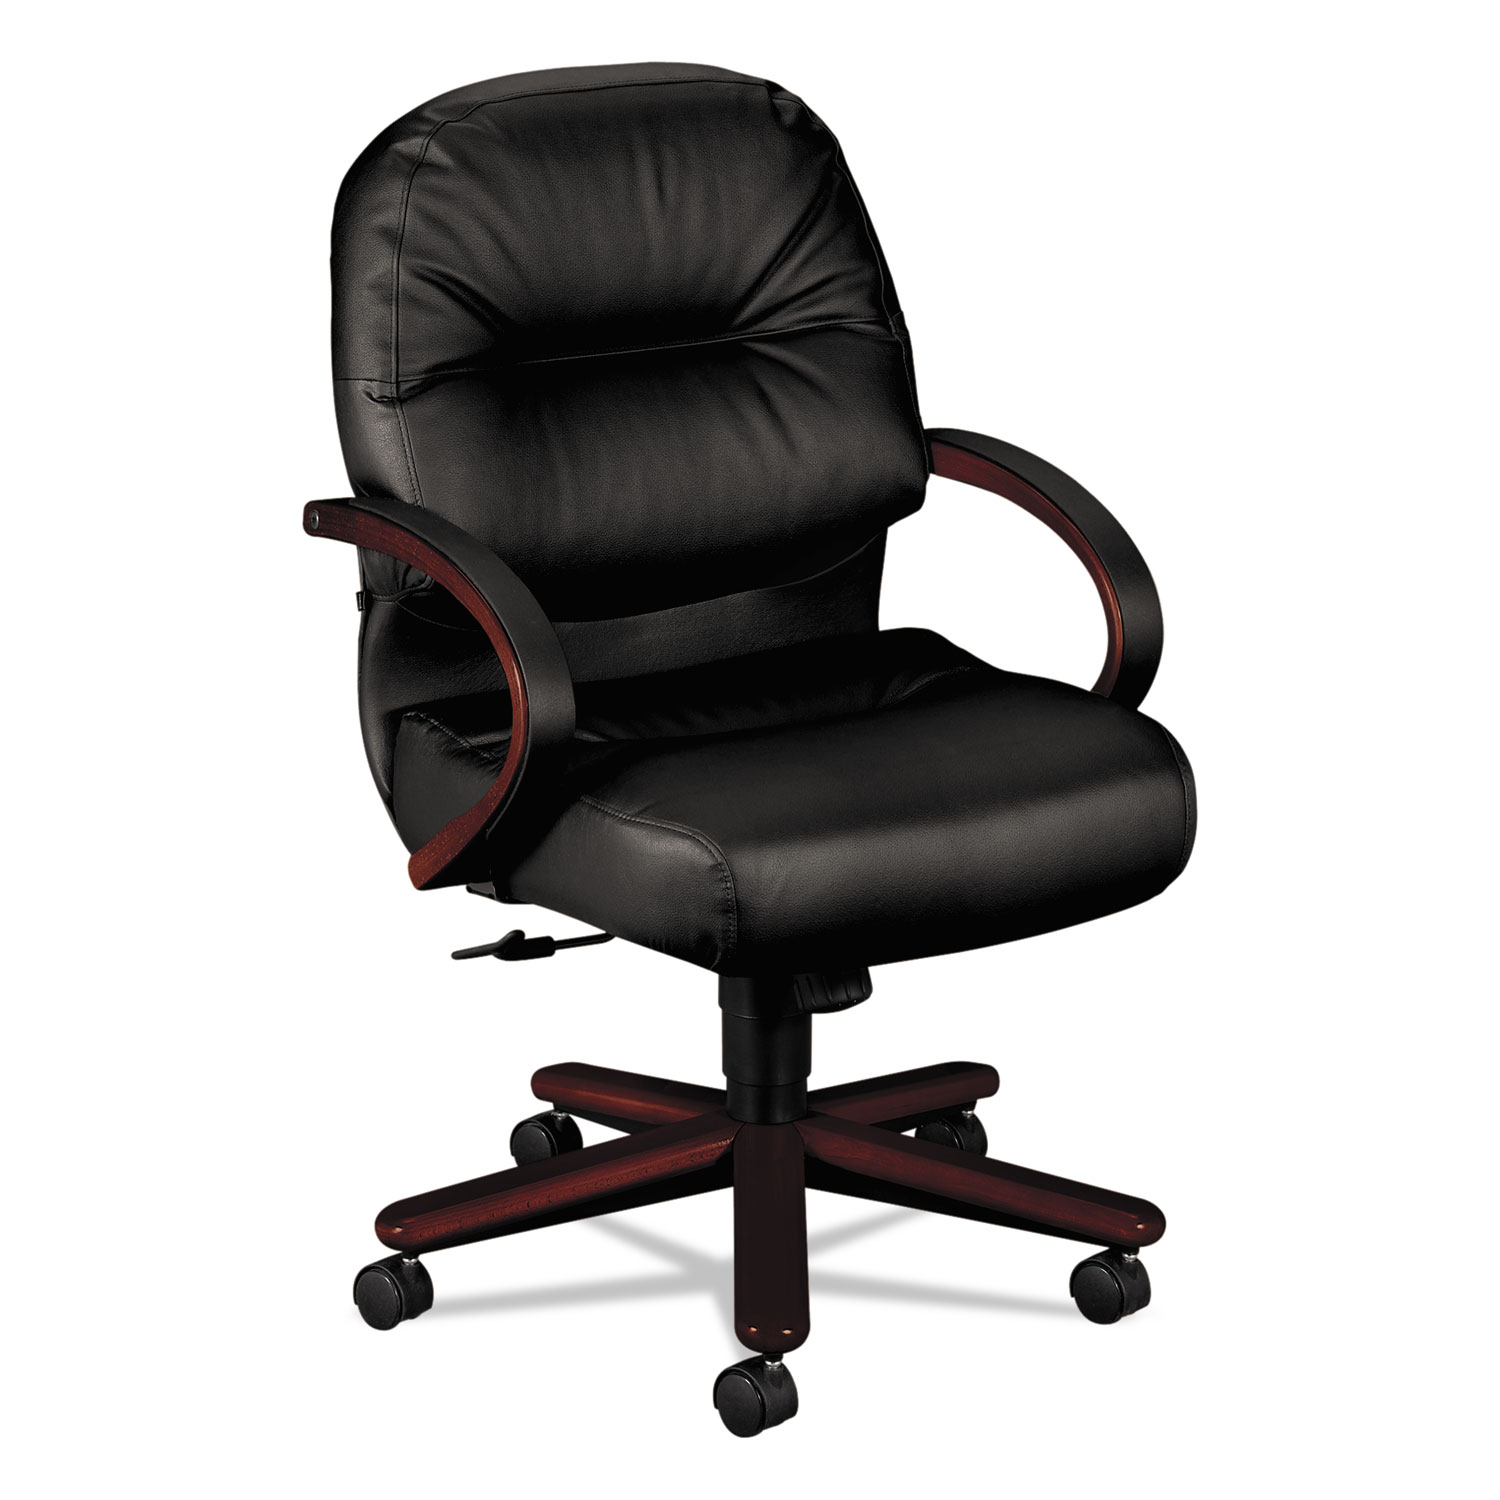  HON H2192.N.SR11 Pillow-Soft 2190 Managerial Mid-Back Chair, Supports up to 300 lbs., Black Seat/Black Back, Mahogany Base (HON2192NSR11) 